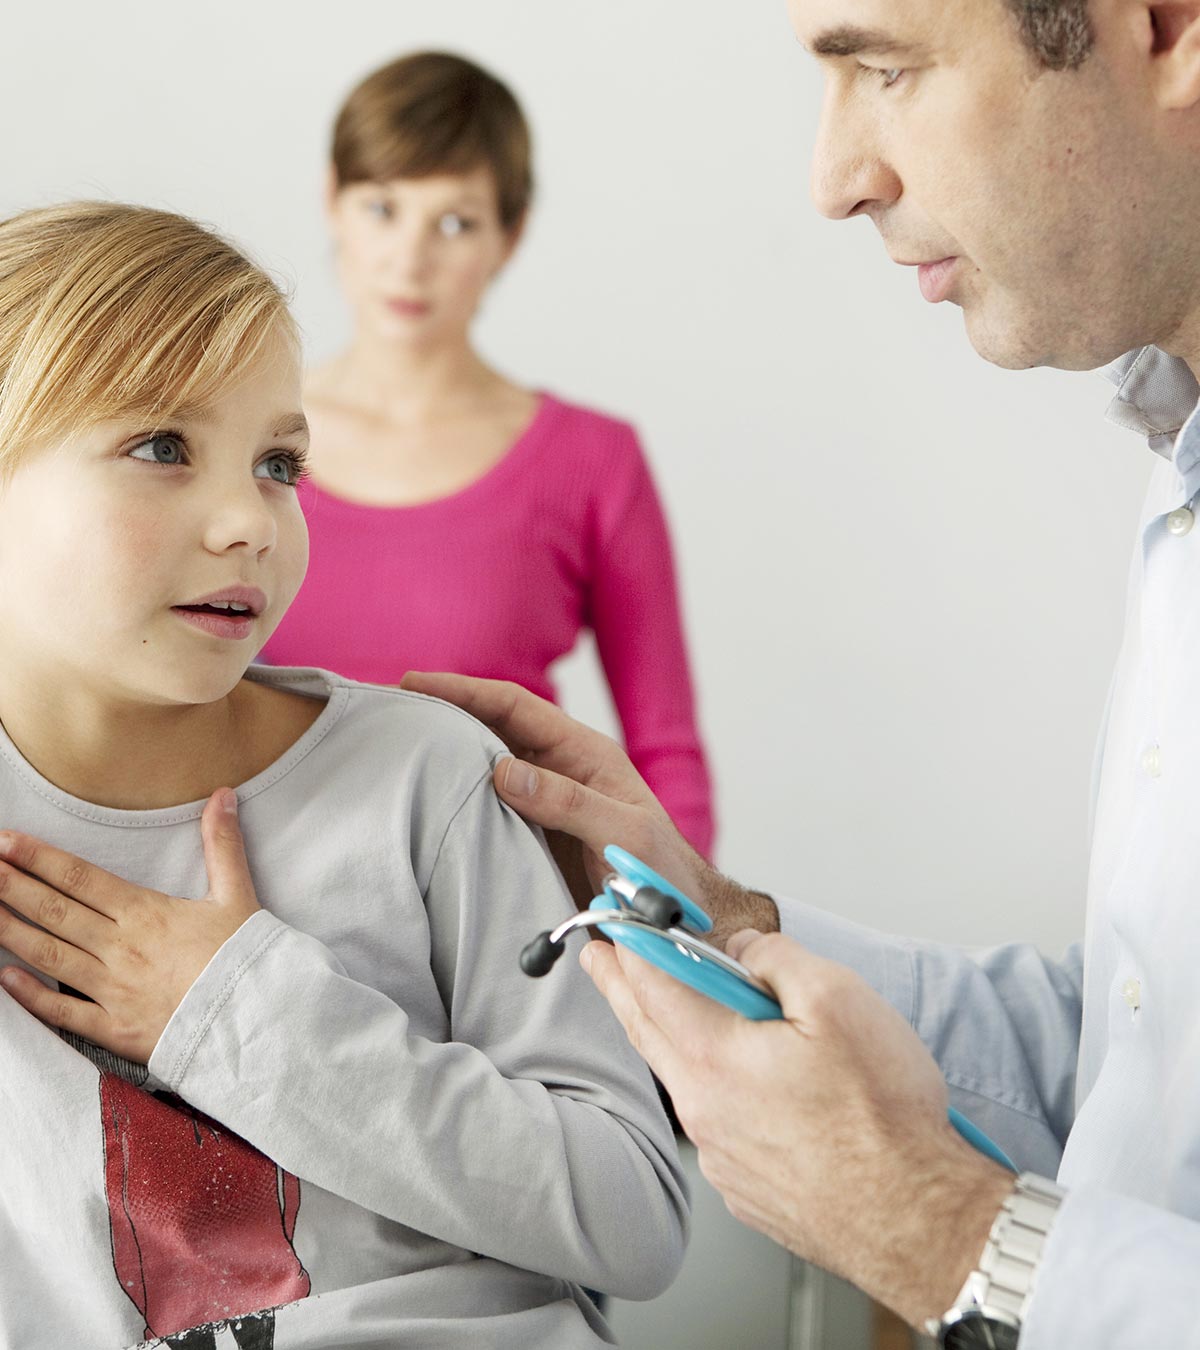 Wheezing In Children: Causes, Symptoms & Home Care Tips